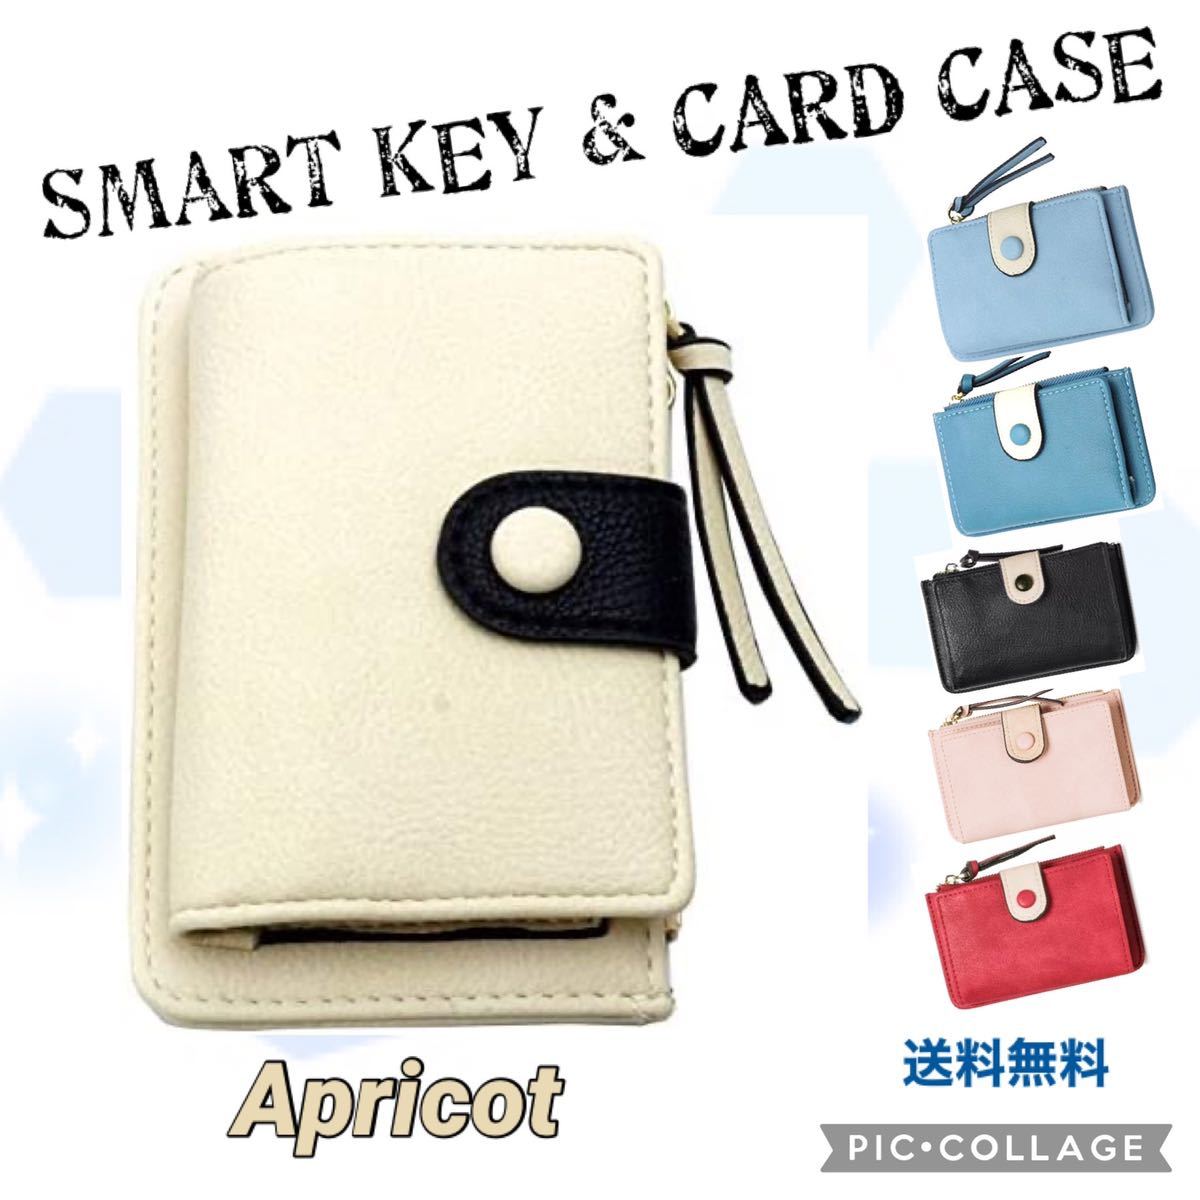 # multifunction key case [ apricot ] card coin purse key holder 